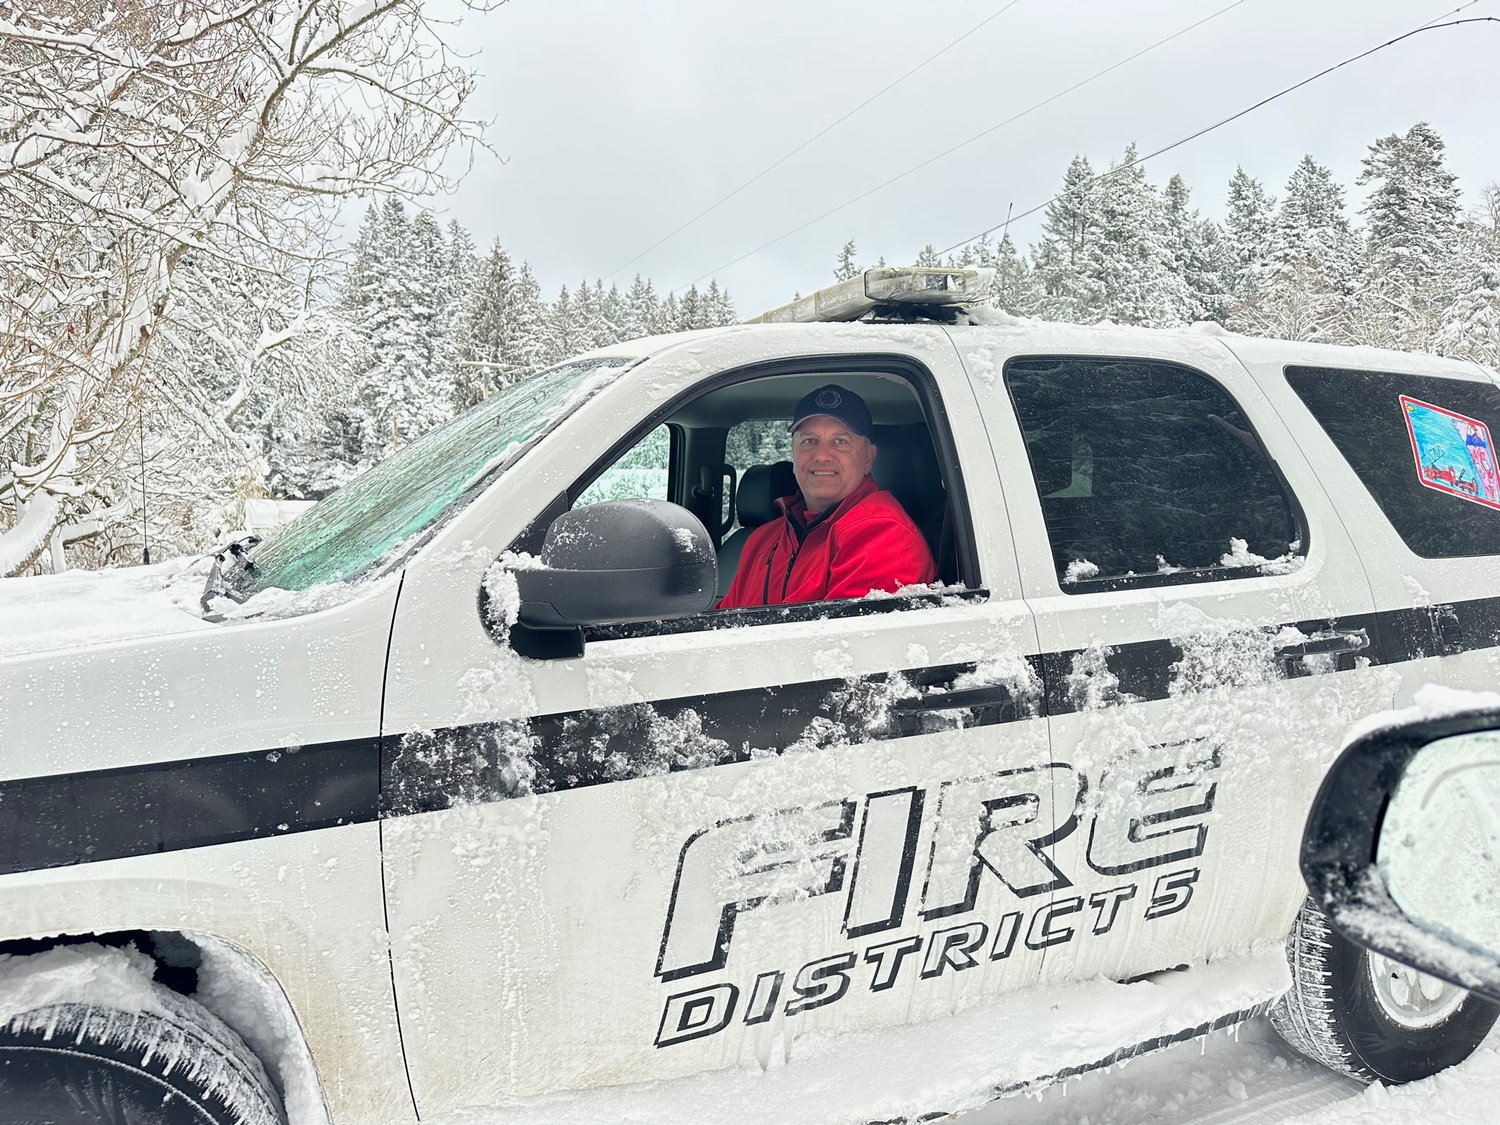 Point Roberts fire chief Christopher Carleton was on the roads early on December 20 to survey the impact of the snowstorm. The district mobilized to help residents and businesses in need.